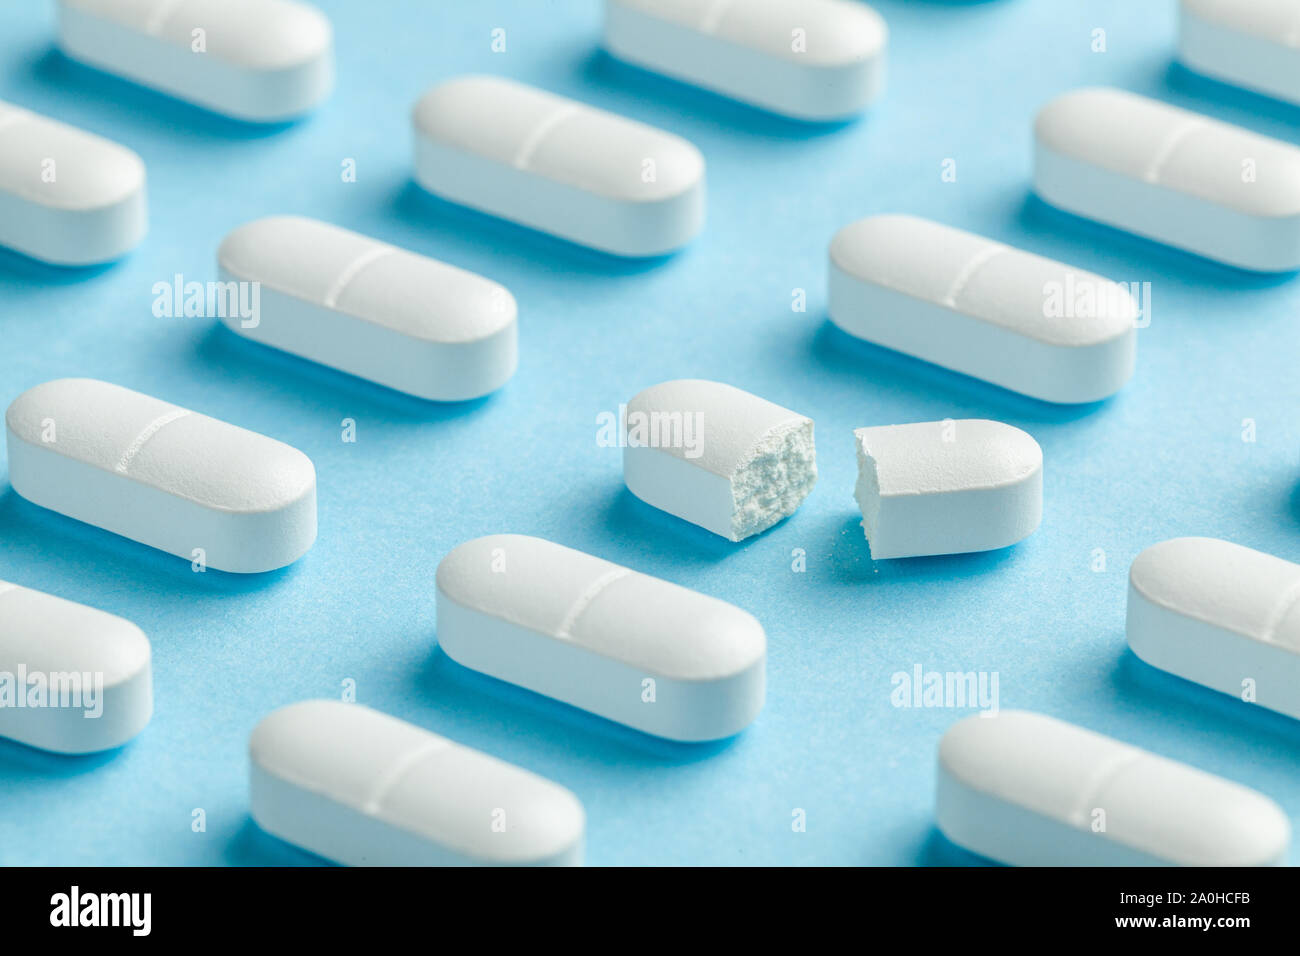 White pills on blue background. One tablet is broken in half, reducing the dose of the medicine. Stock Photo